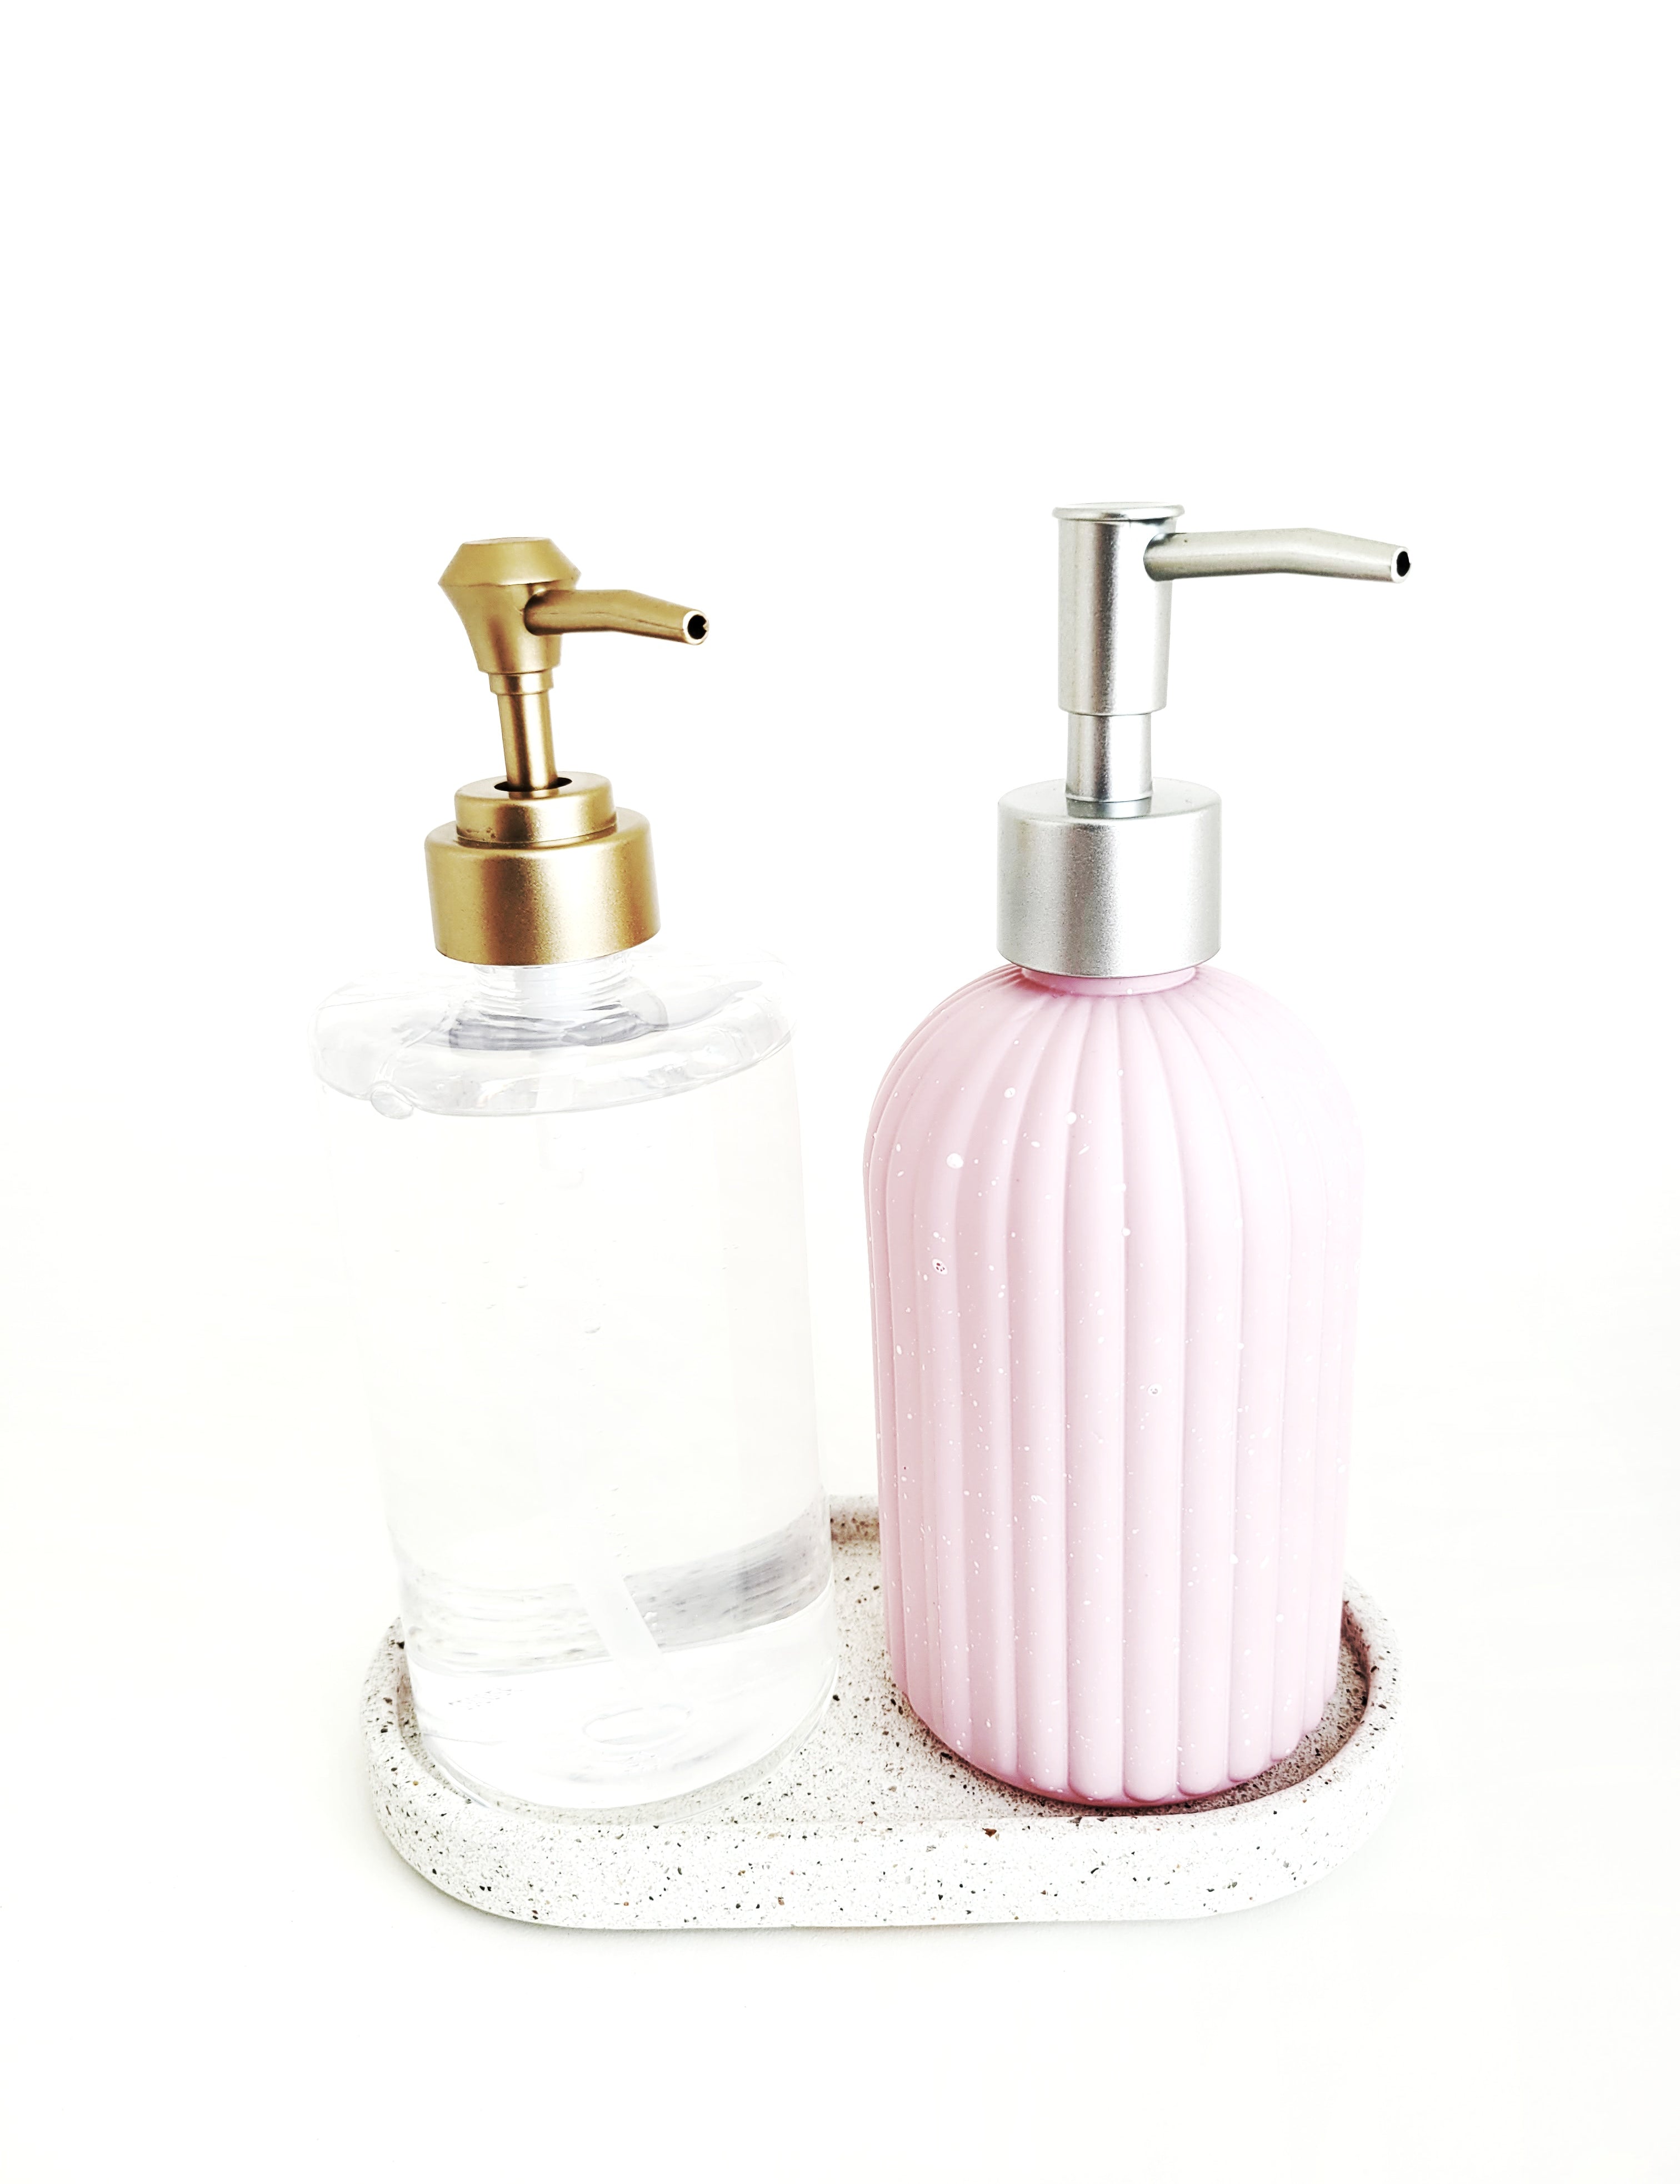 Sparkling White Sandstone Soap Dispenser Tray with one  Clear Round Soap Dispenser Bottle and one Pink - Elegant Bathroom Accessory